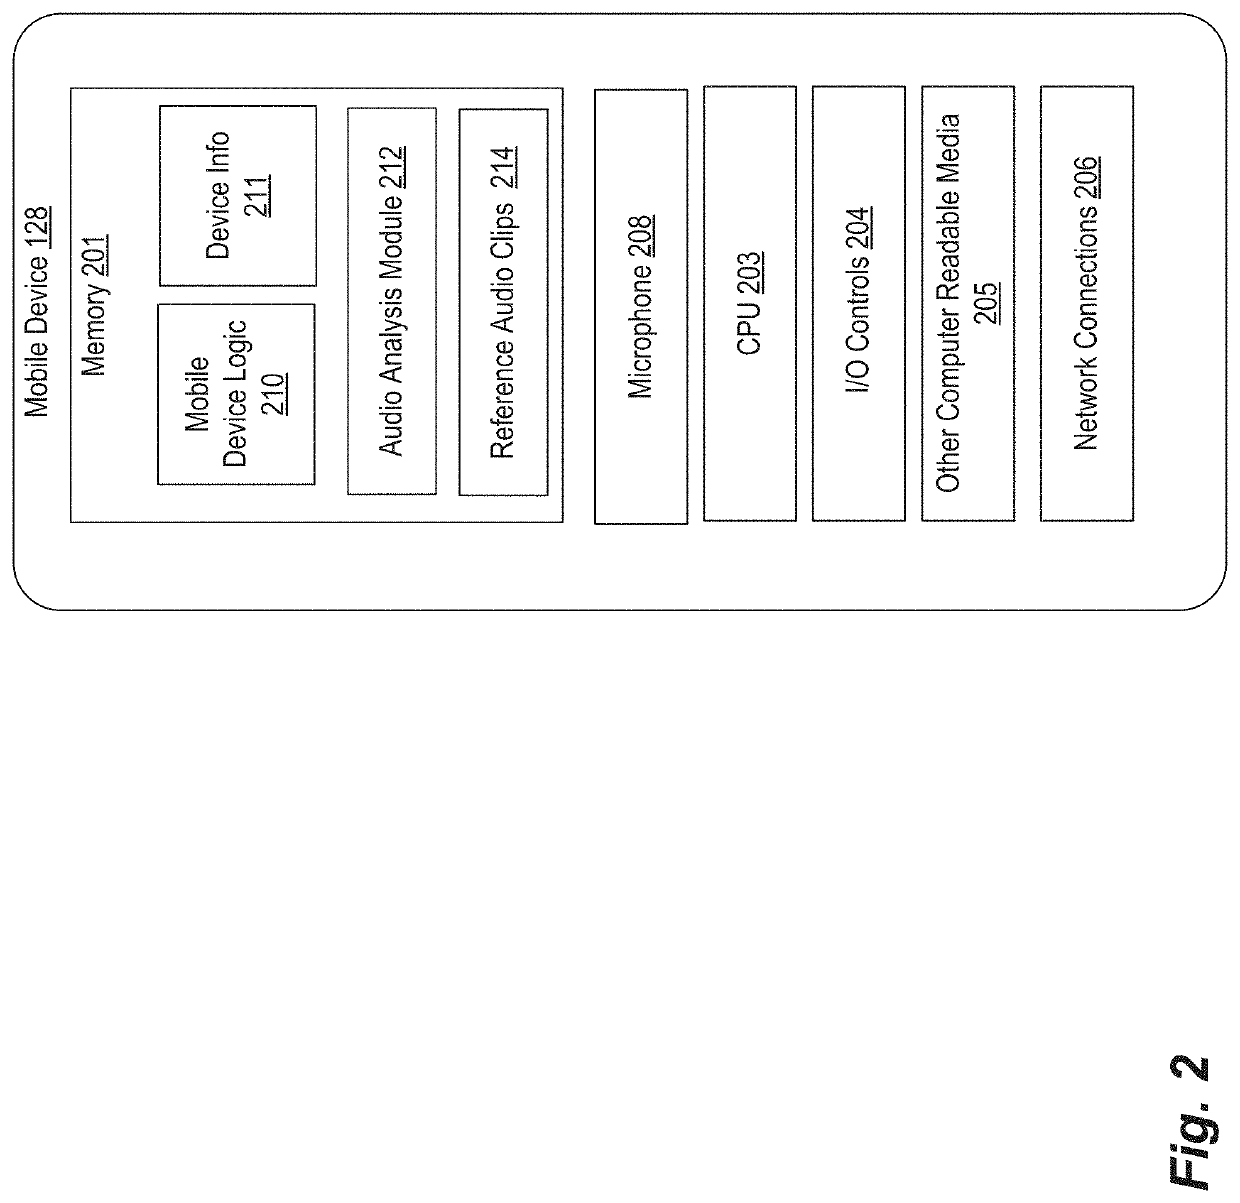 Systems and methods for facilitating configuration of an audio system